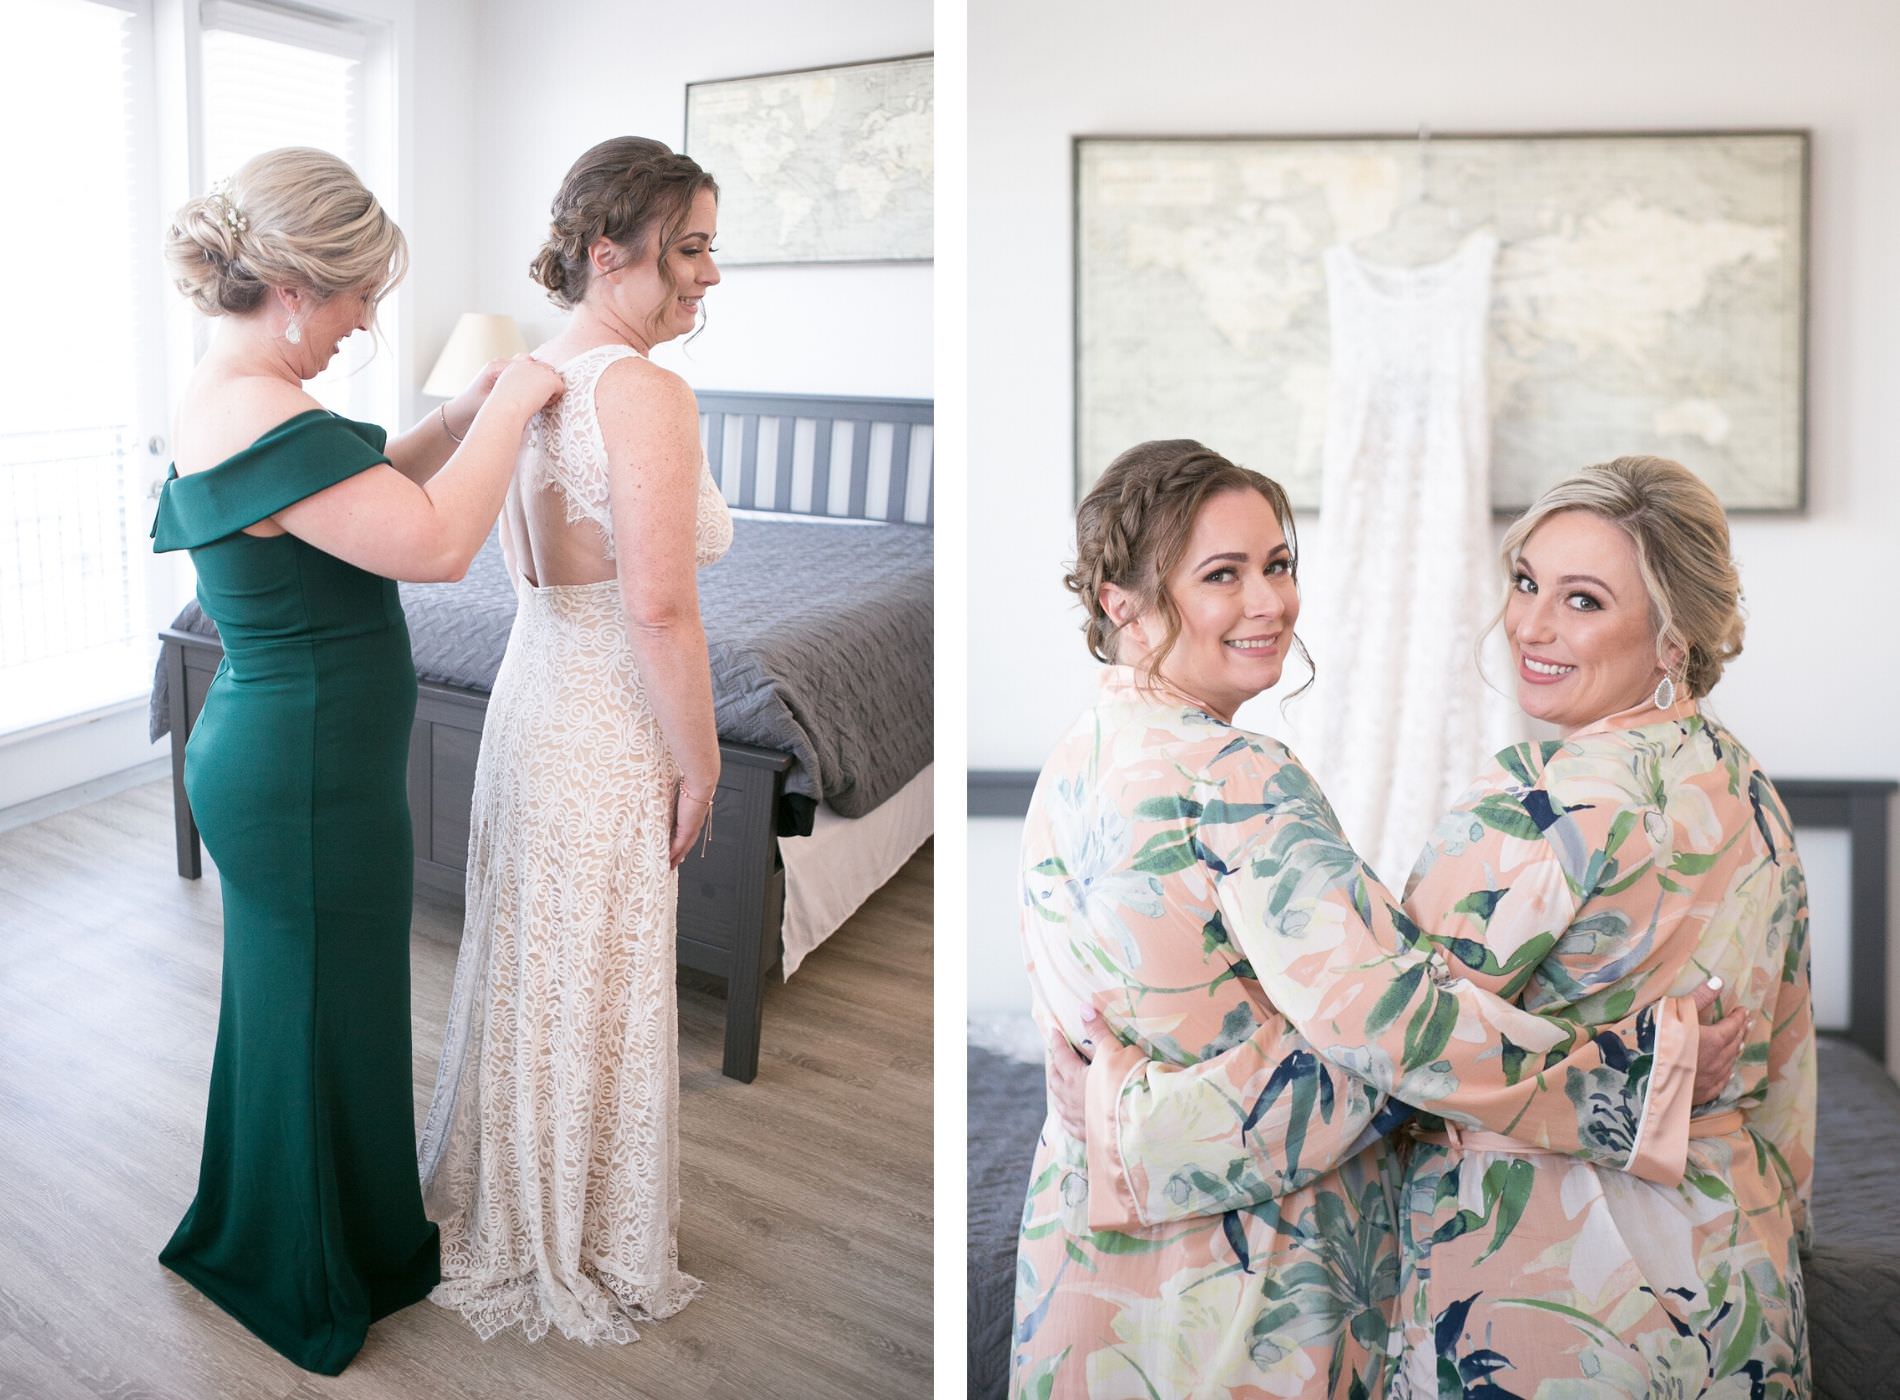 Bride Getting Ready Wedding Portrait with Sister in Ivory Lace Open Keyhole Back Wedding Dress, Bride and Sister in Matching Floral Robes and Braided Updo | Wedding Photographer Carrie Wildes Photography